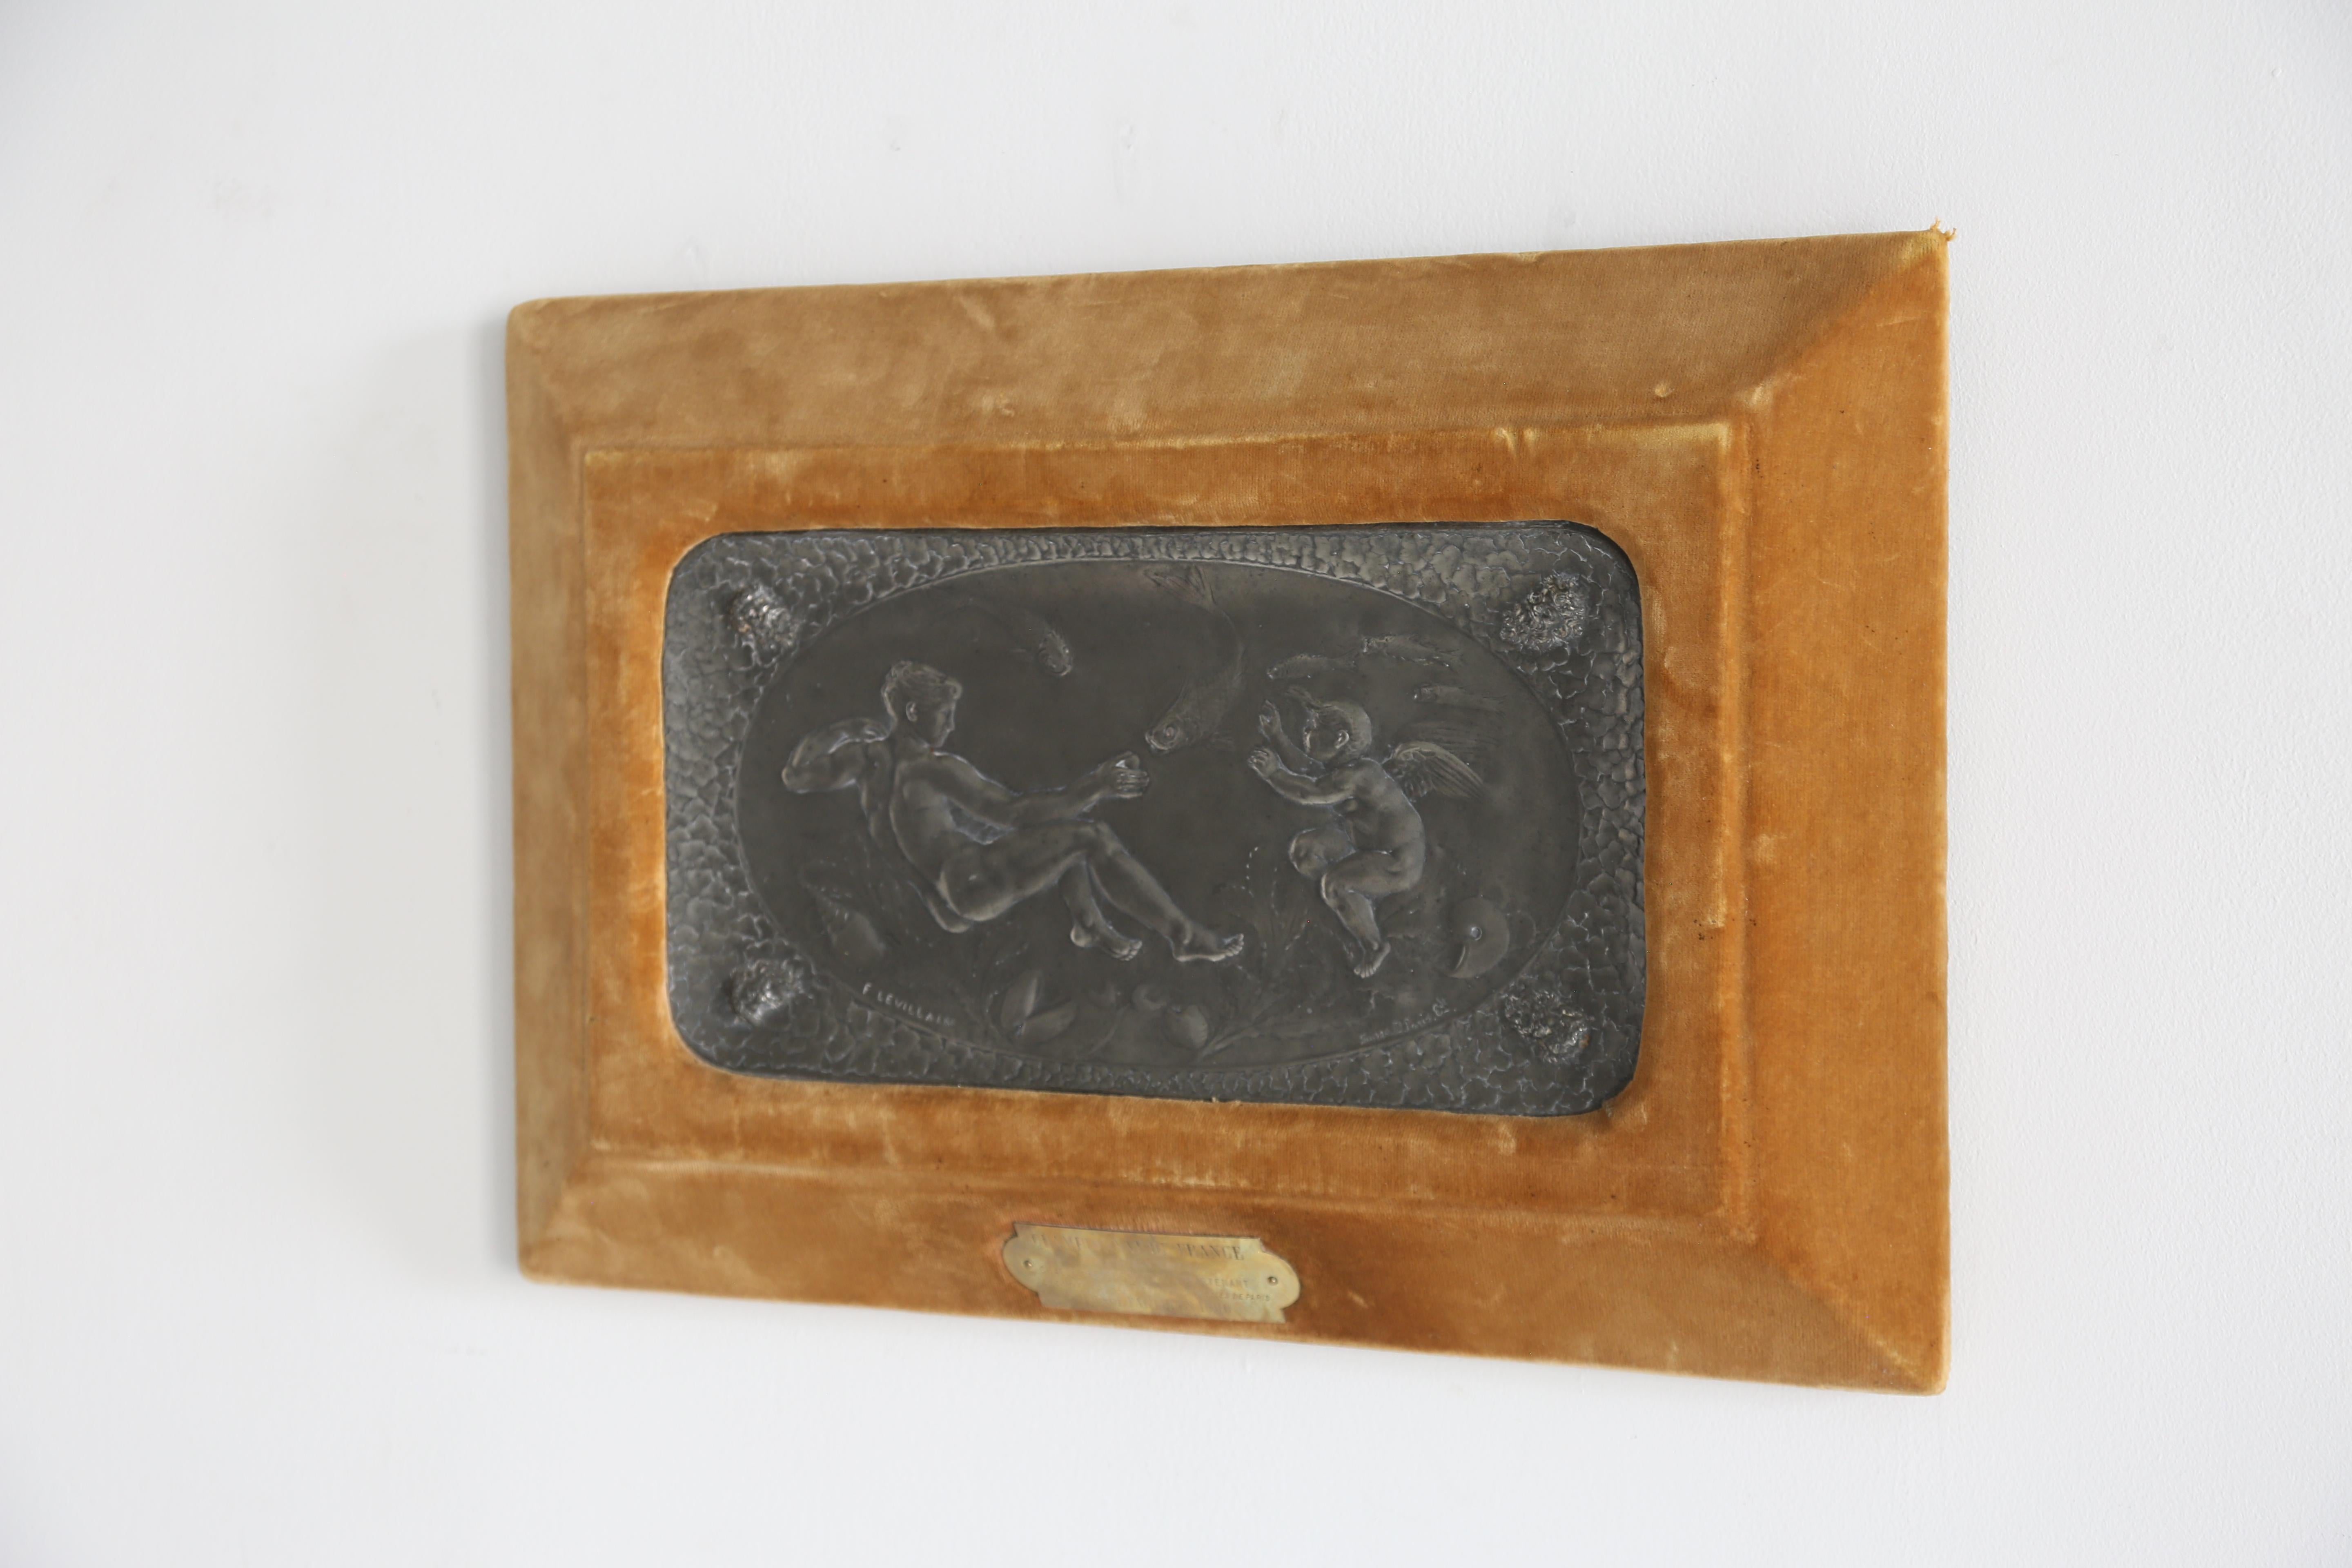 A period Parisian silver bas-relief wall plaque, set in the highest quality velvet surround.

Possibly a water based sporting honour dated, ‘1900’.

Very fine workmanship visible throughout.

Signed ‘F. LeLevillain.’

Ferdinand Levillain (1837-1905)